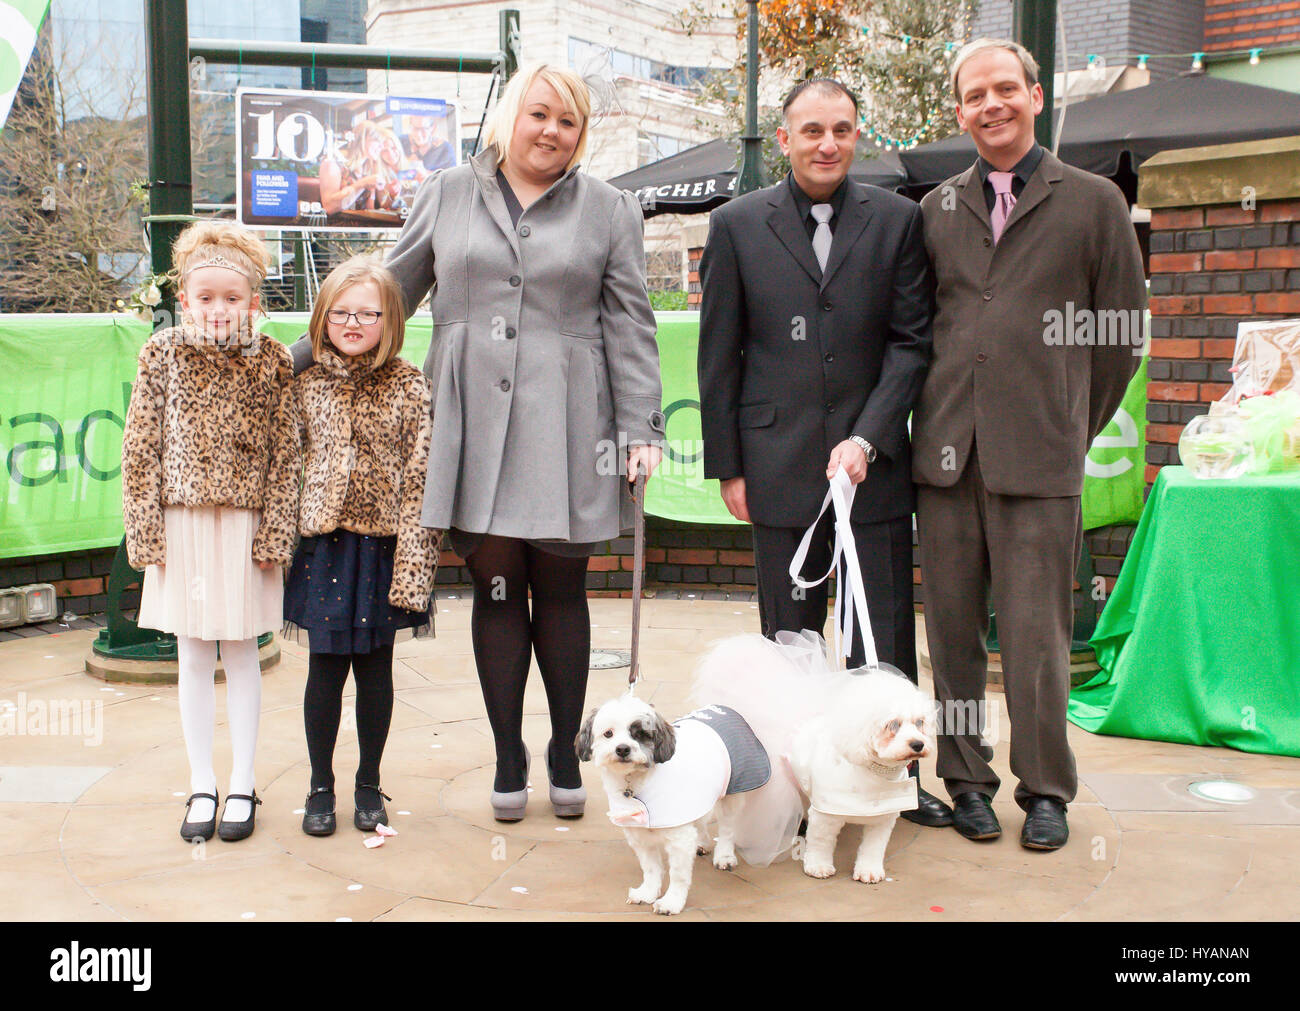 Brindley Place, Birmingham: From left to right, Beccy Haywood holding dog rufus and her two dauthers, co-owner George Michael and Graham Riley holding his dog Lady. A DOGGY wedding could be the most whirlwind yet as former lonely-hearts Rufus and Lady get hitched after dating for just THREE-WEEKS. Pictures show how love-up Bichon Frise Lady (3) and Cavachon Rufus (2) were walked up the aisle by their owners and were married to the delight of 60 human and canine wedding guests. Despite the speed of their relationship the setting couldn’t be more romantic – with the UK’s only pet registrar Ann C Stock Photo